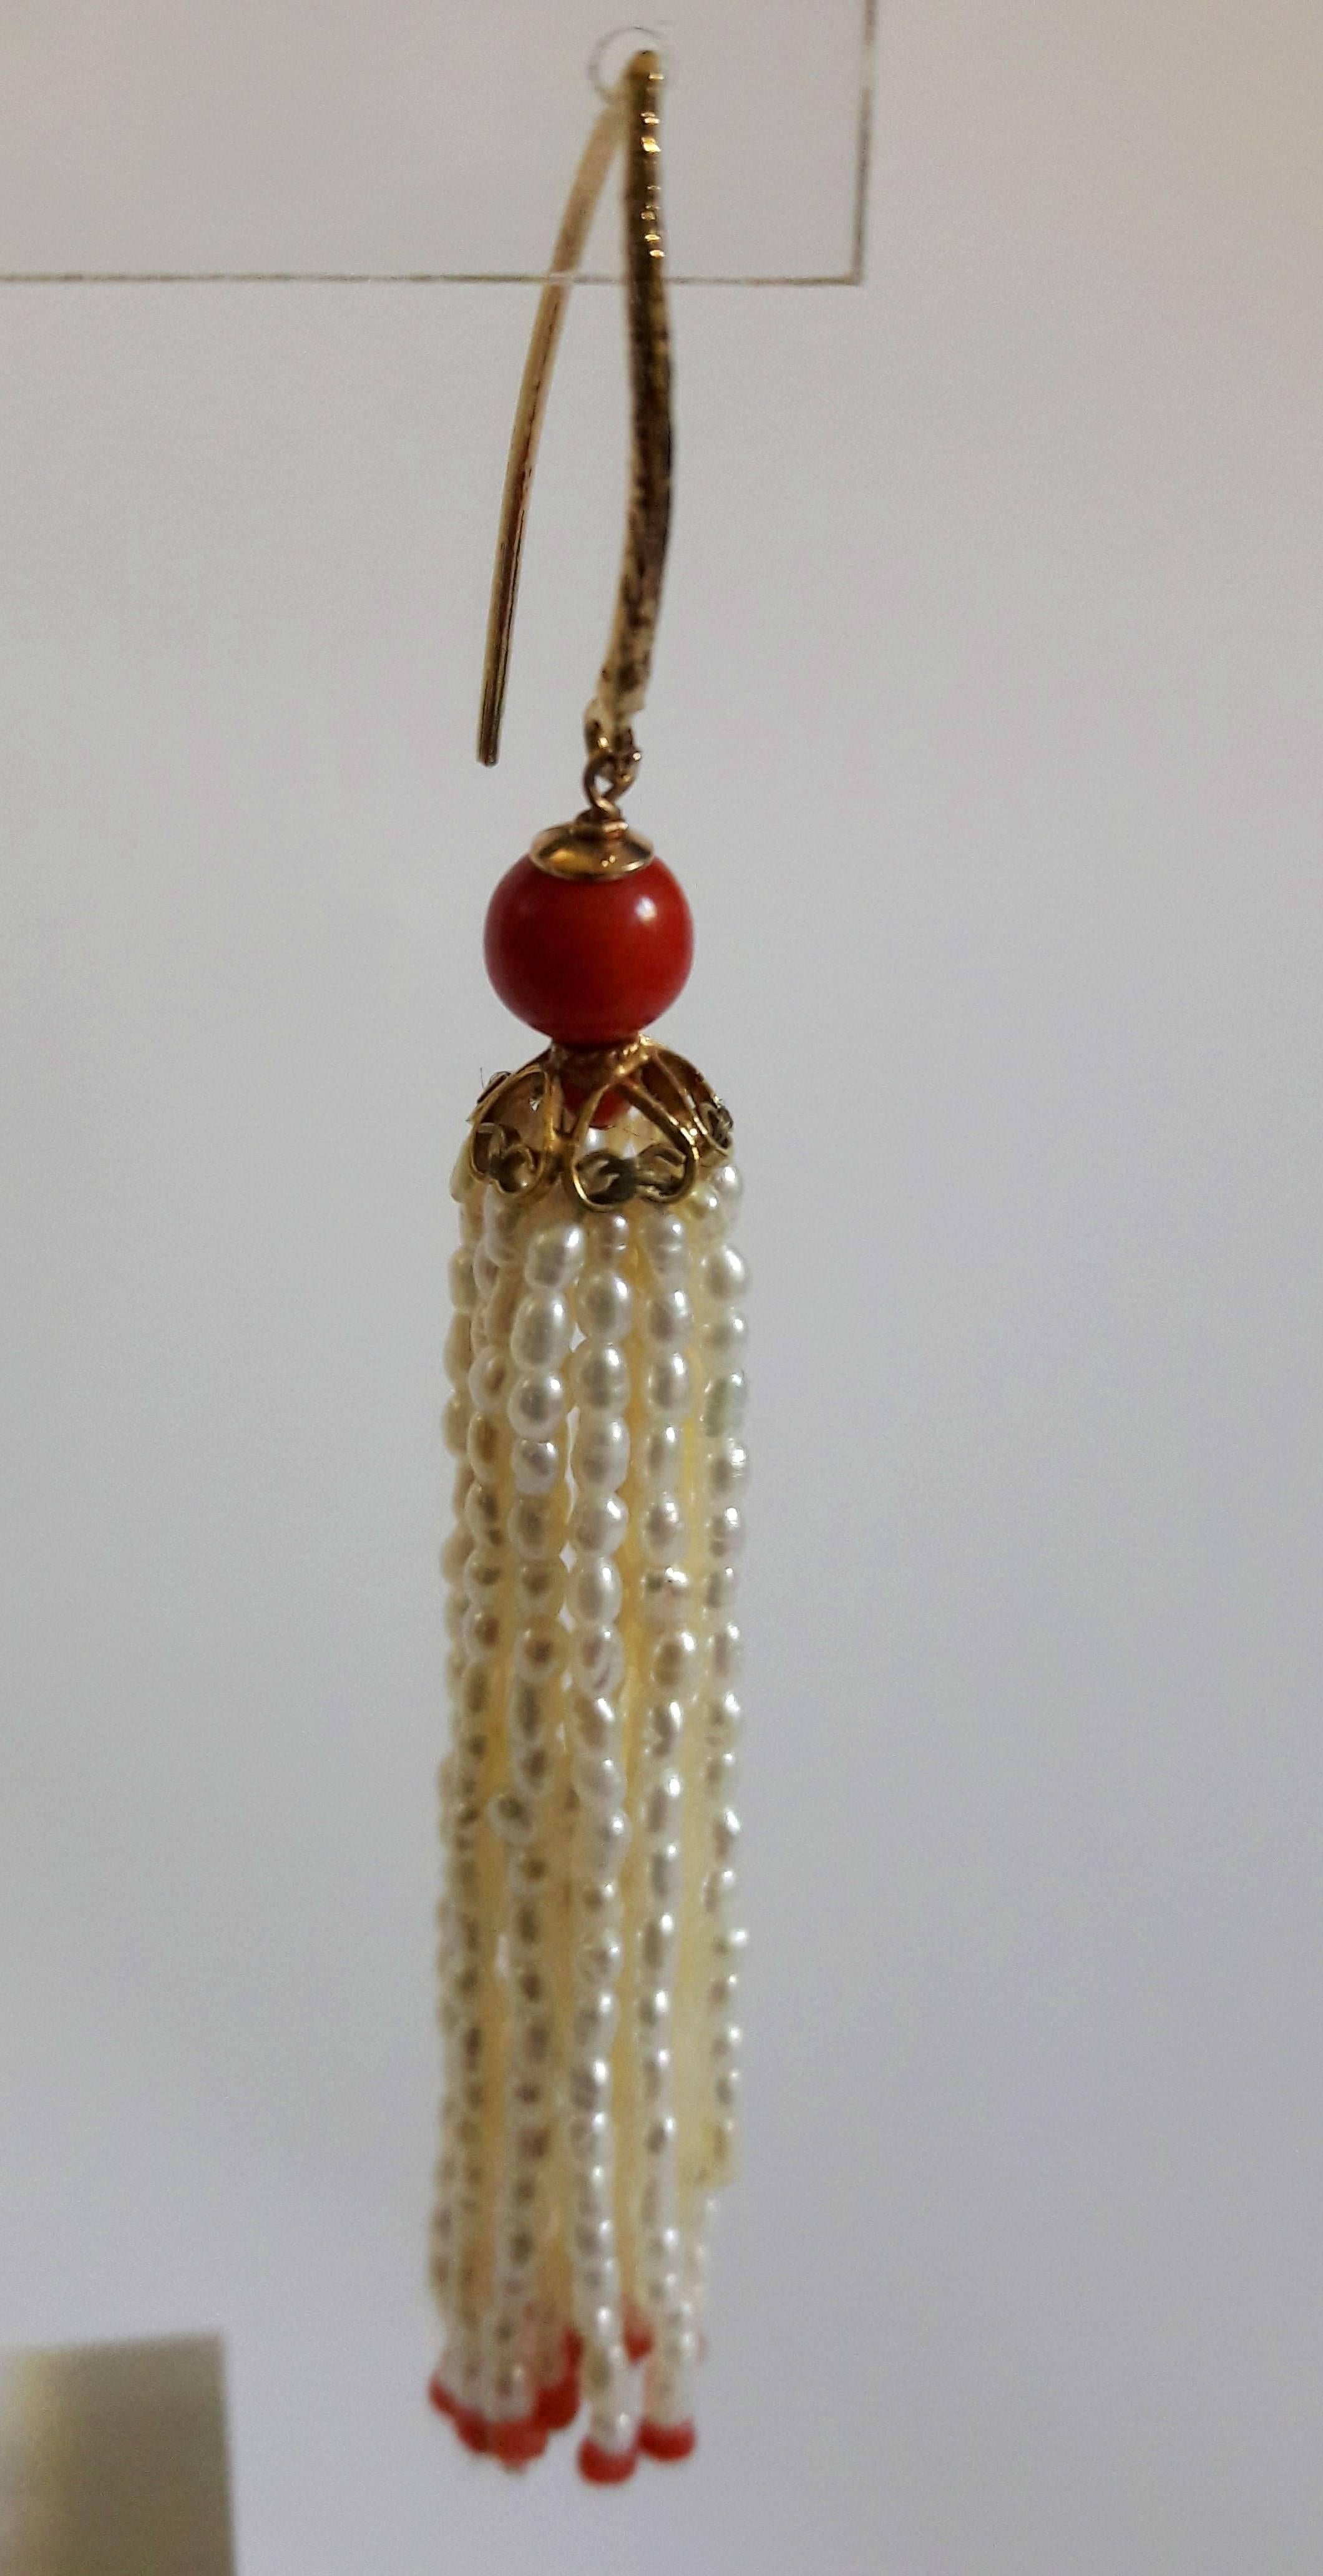 These beautiful Pearl and Natural Coral Tassel earrings are composed of 18 strands each of fine rice pearls finished with small coral beads. Above the tassel, sits a 14 K yellow gold filigree cup and a 4 mm coral bead, from which the gold ear-wire